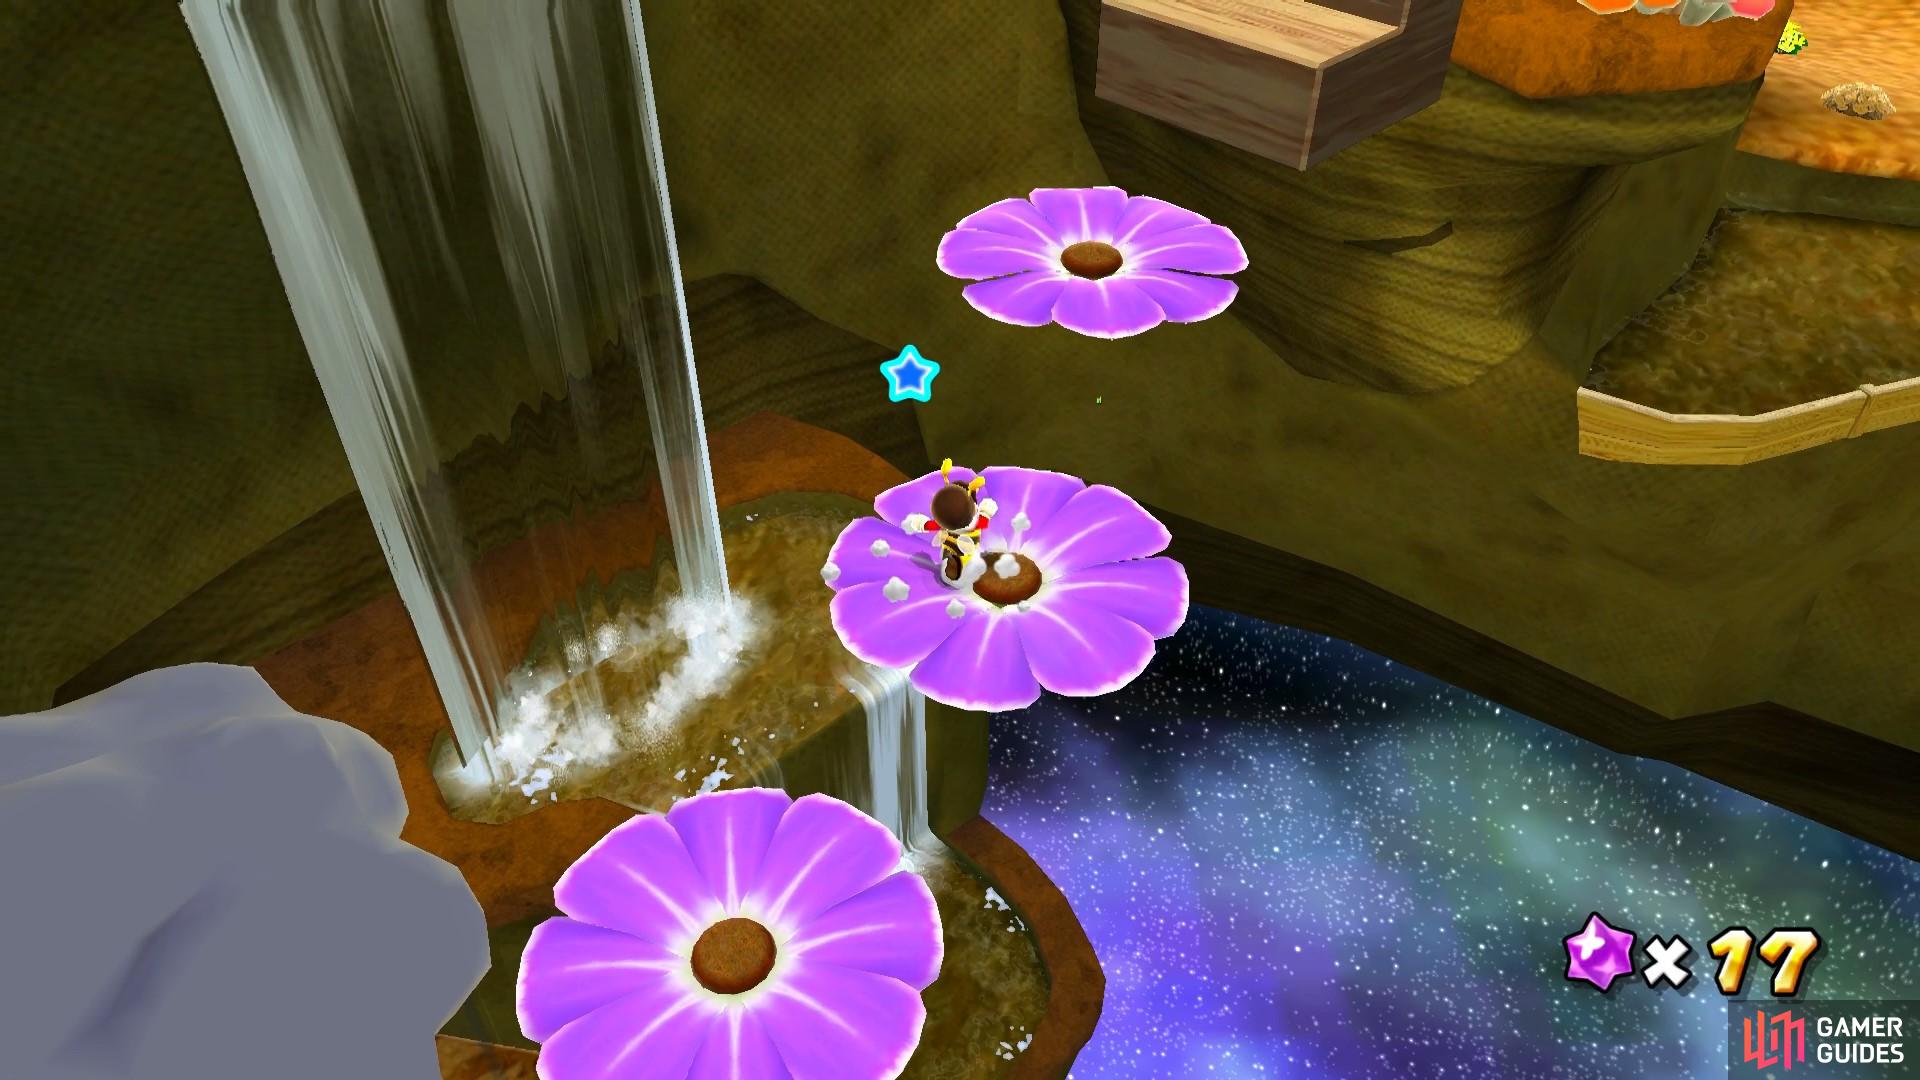 You can’t jump on the flowers unless you’re Bee Mario.